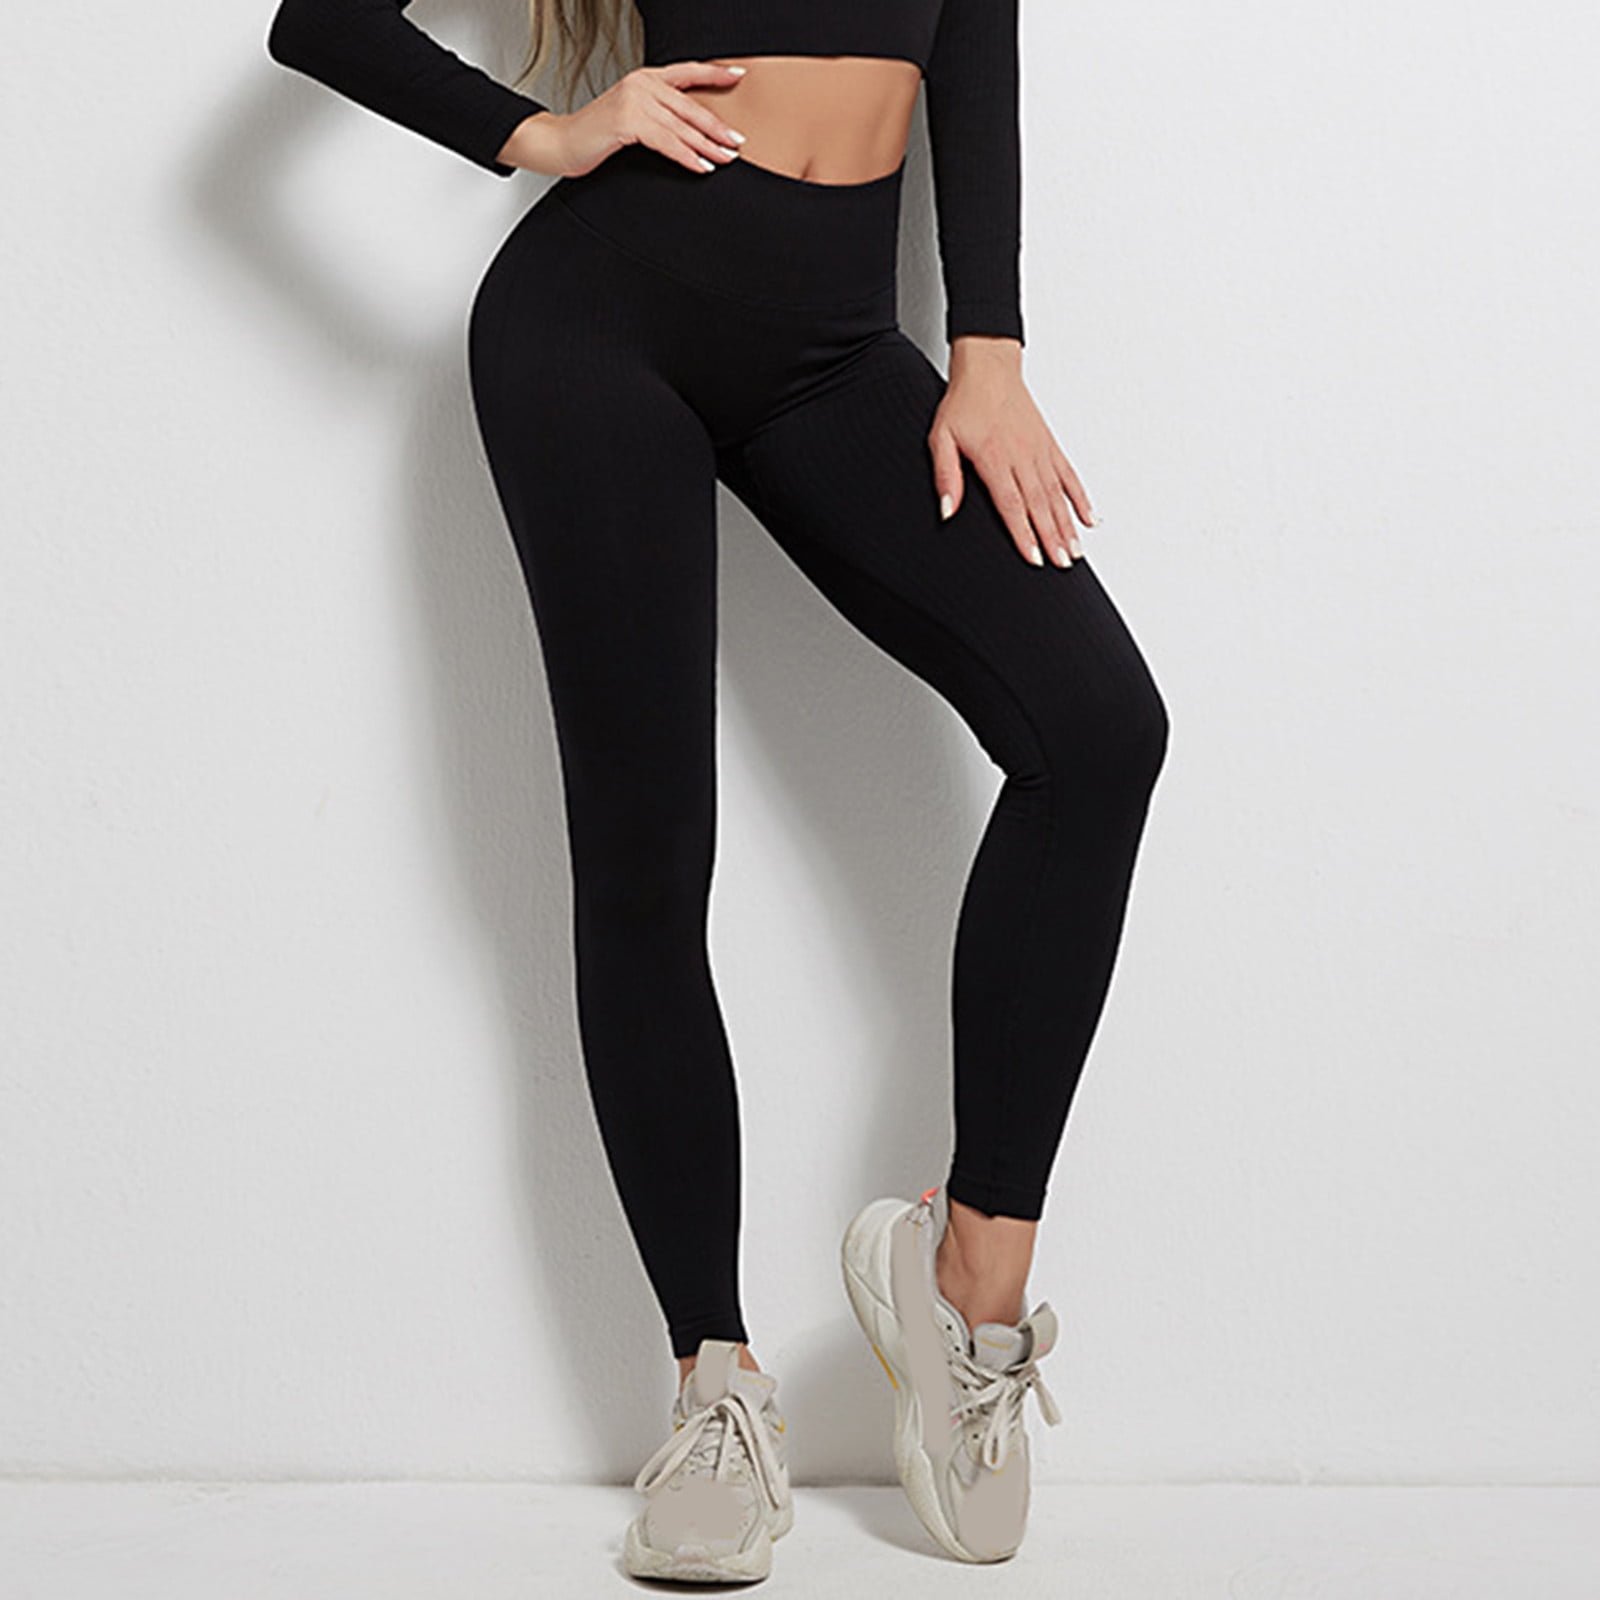 CTHH Leggings for Women Tummy Control-High Waisted Non See Through Black  Soft Workout Yoga Pants